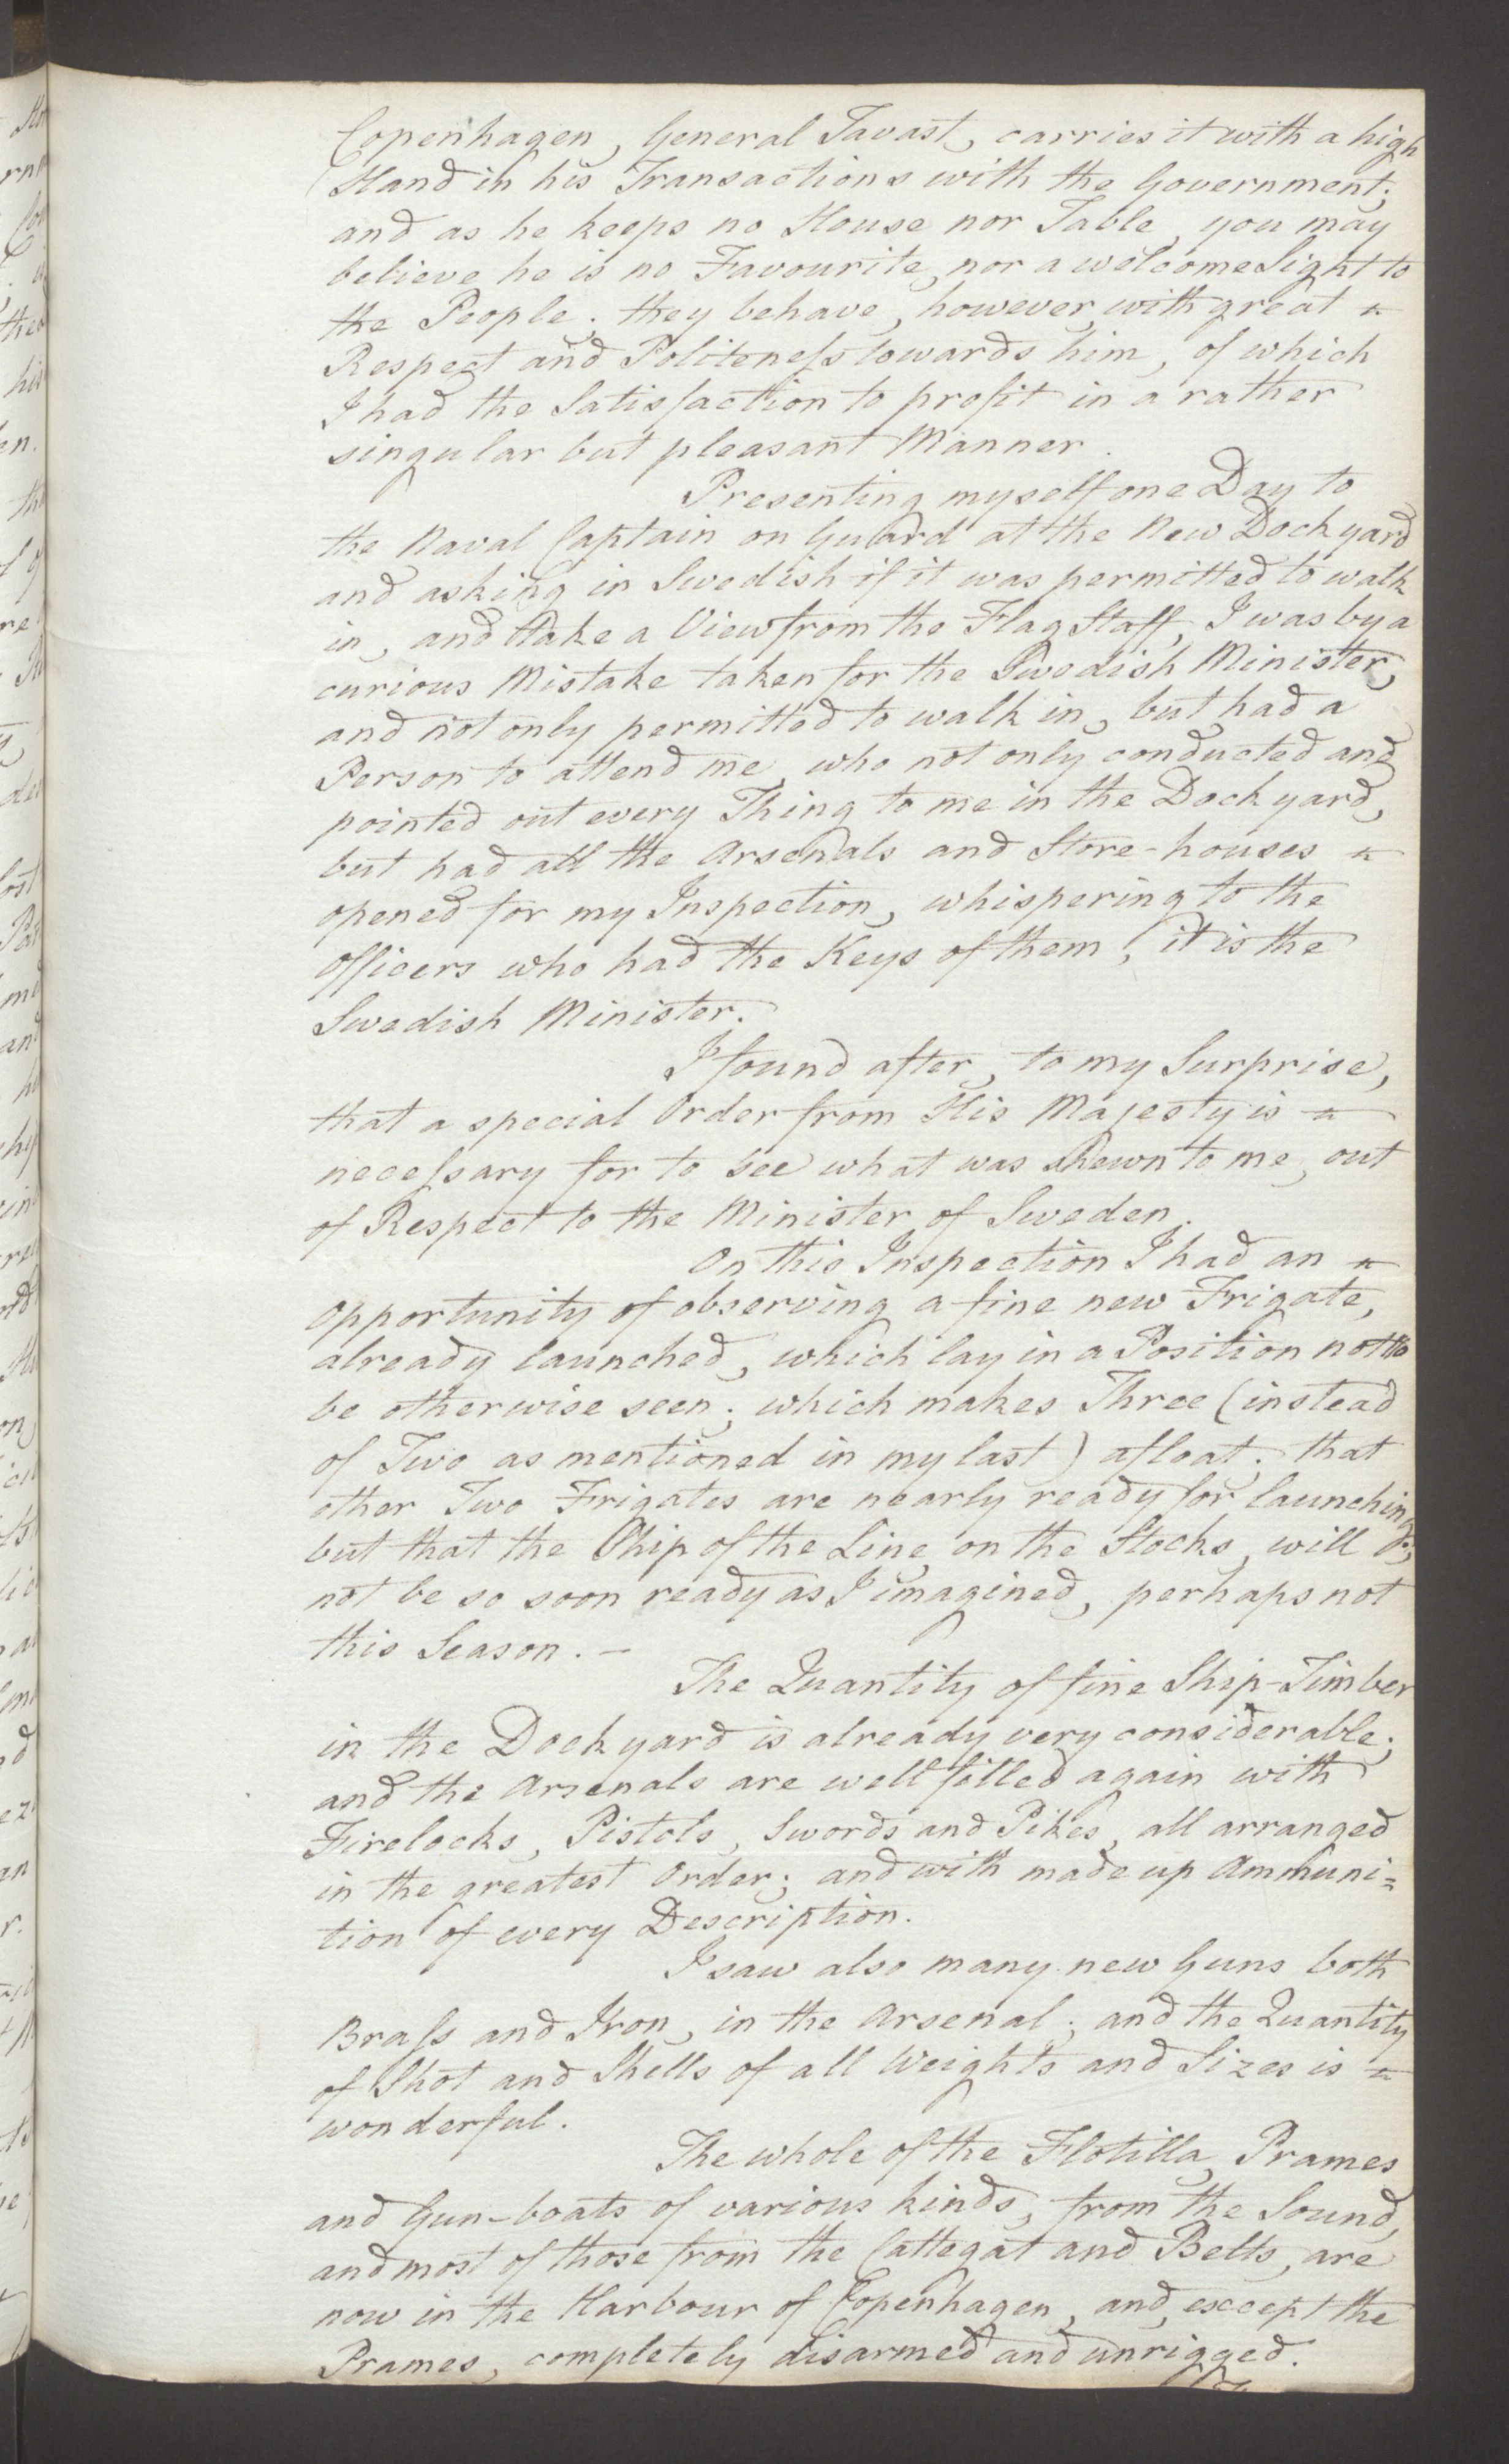 Foreign Office*, UKA/-/FO 38/16: Sir C. Gordon. Reports from Malmö, Jonkoping, and Helsingborg, 1814, p. 77